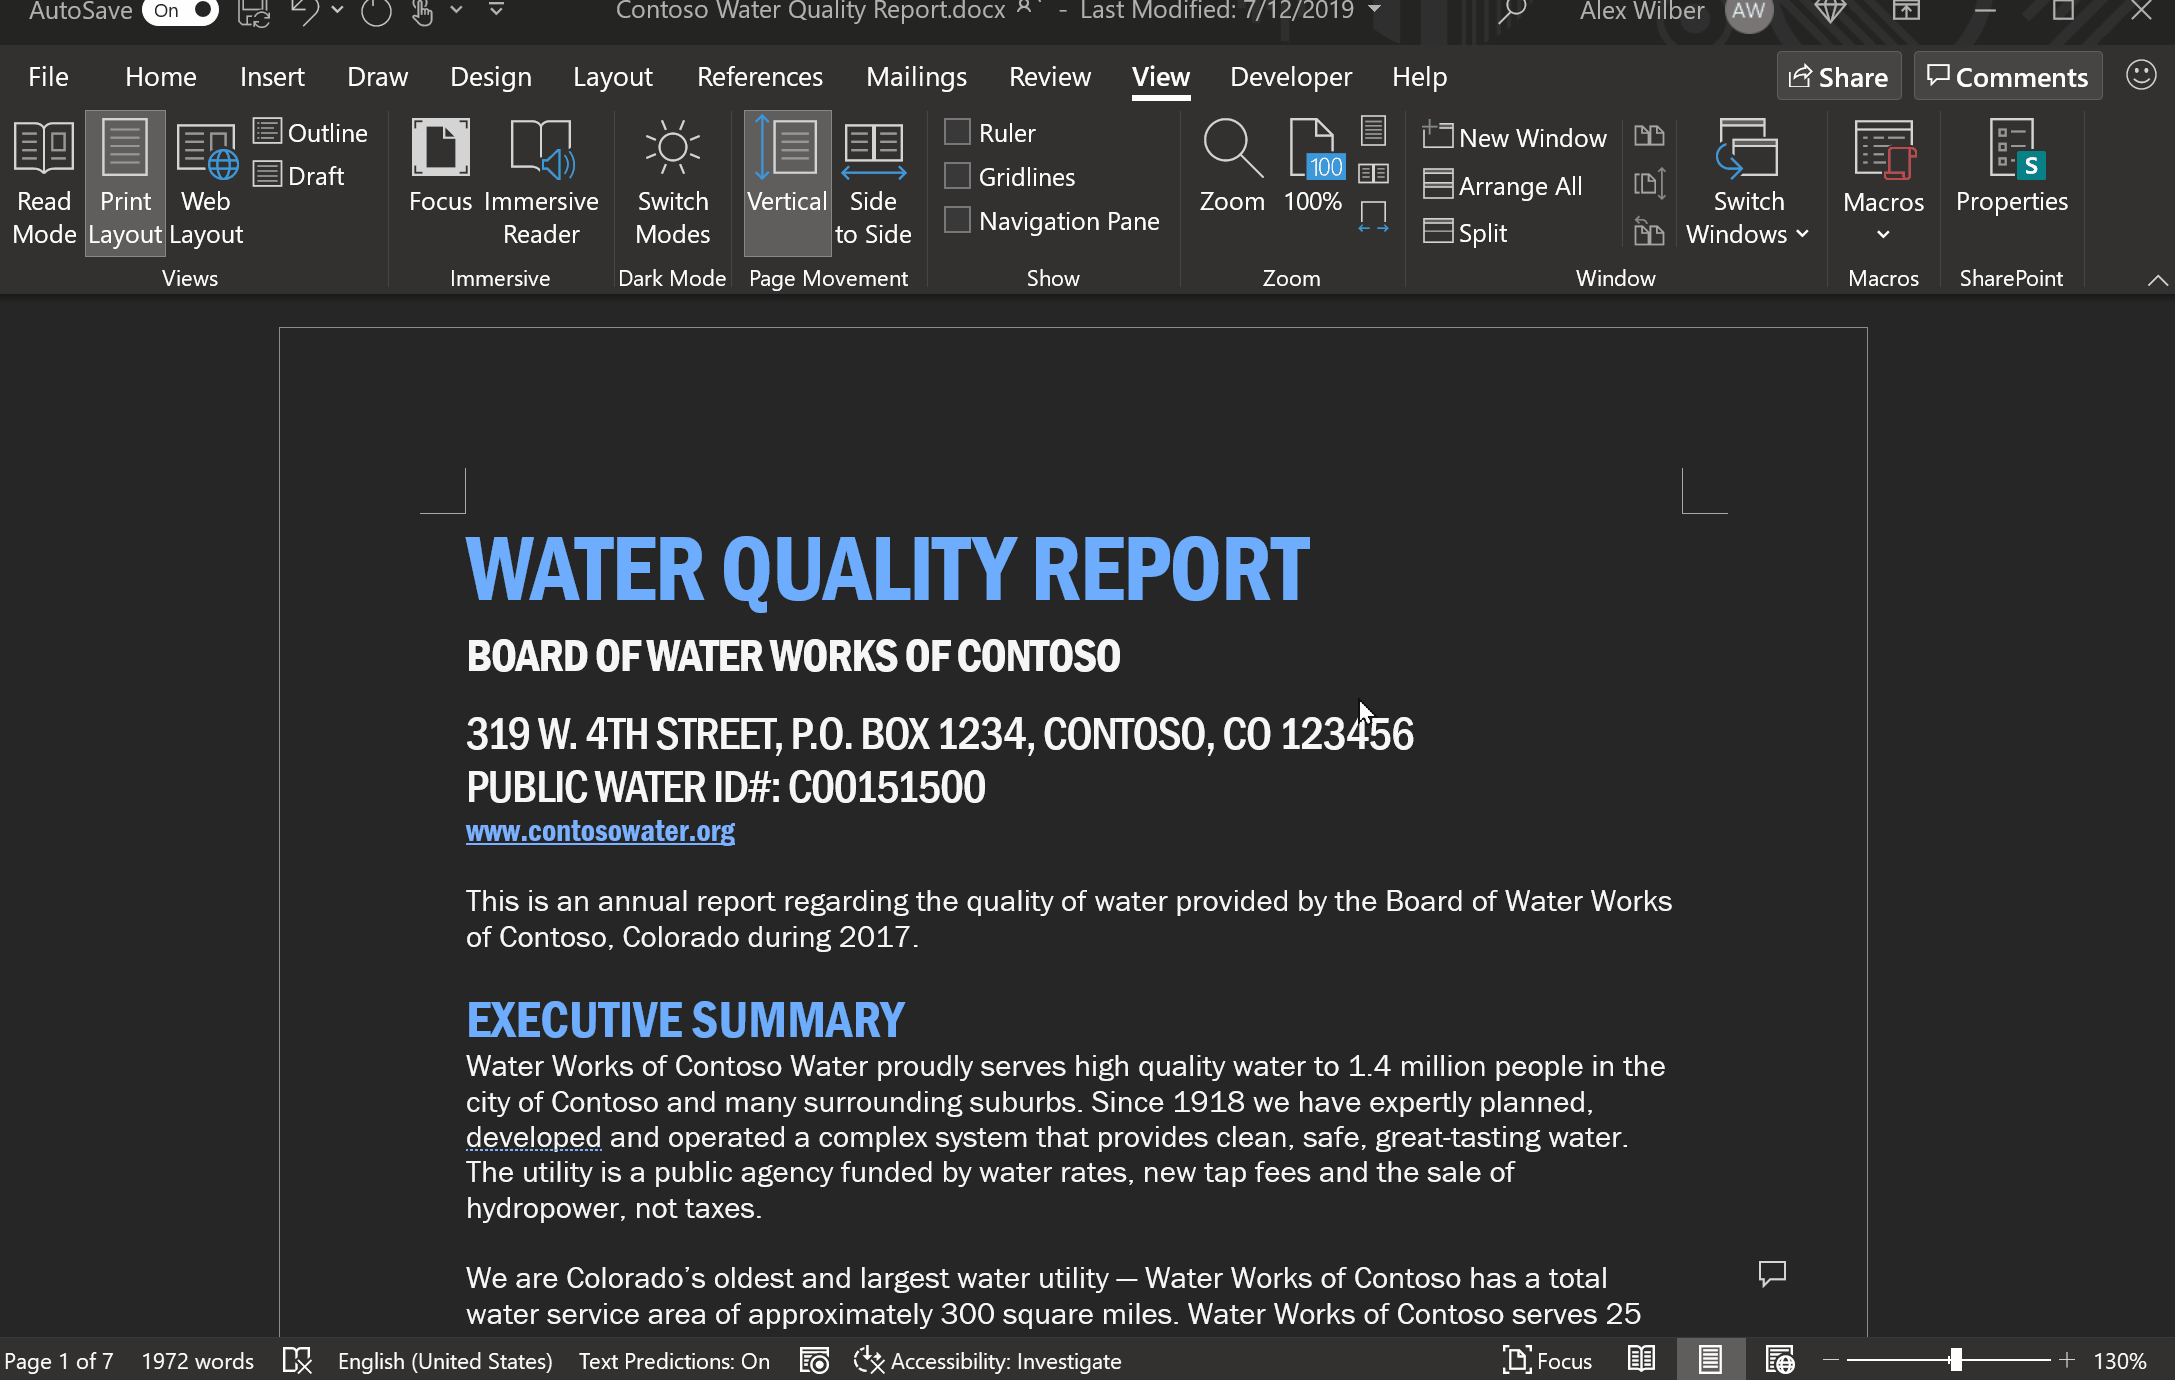 ms office reader for mac